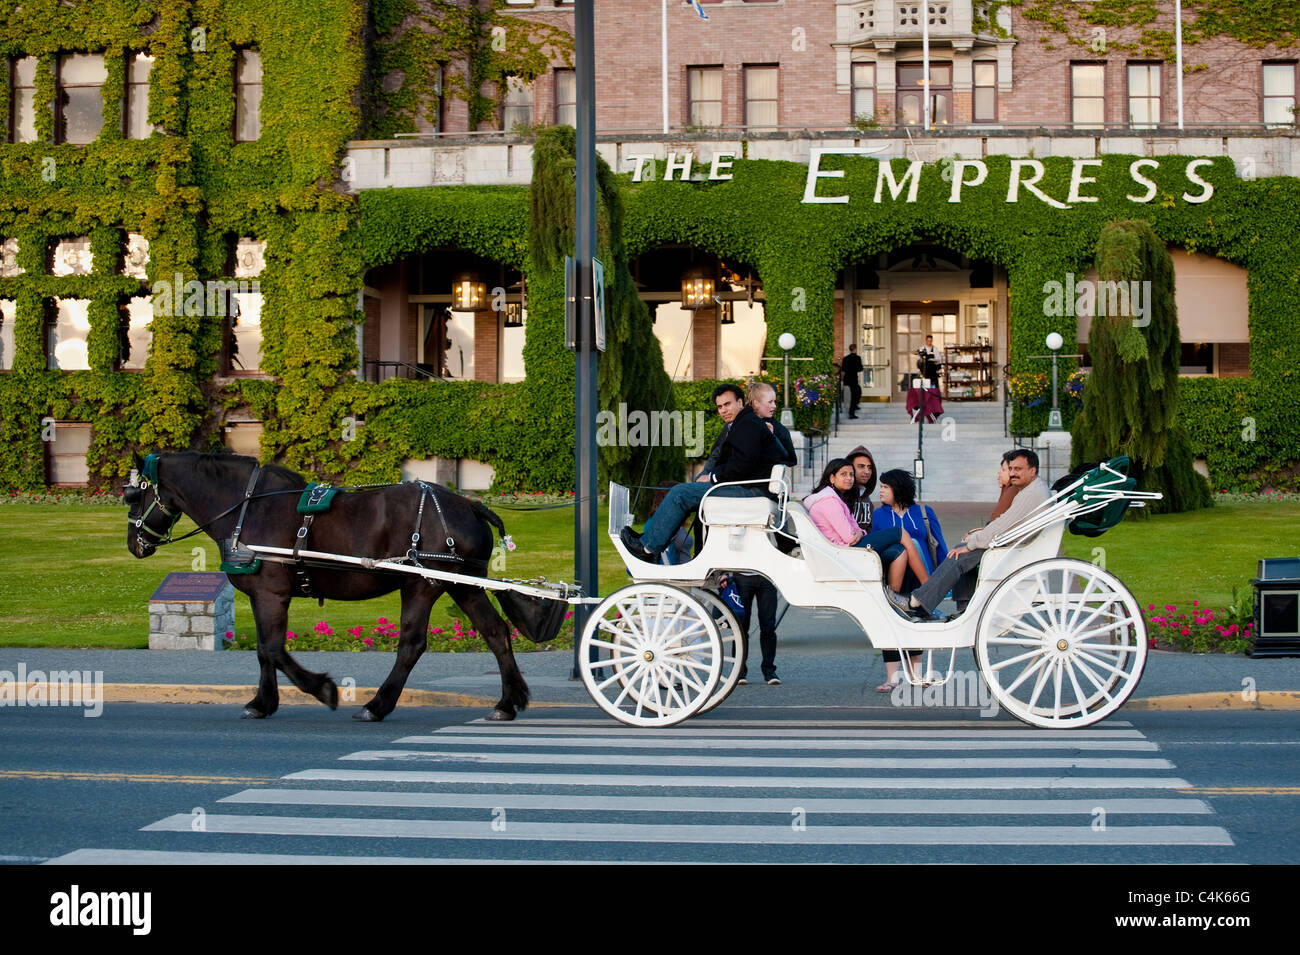 A classic horse and carriage delivers passengers to the Fairmont Empress Hotel in Victoria, British Columbia, Canada. Stock Photo